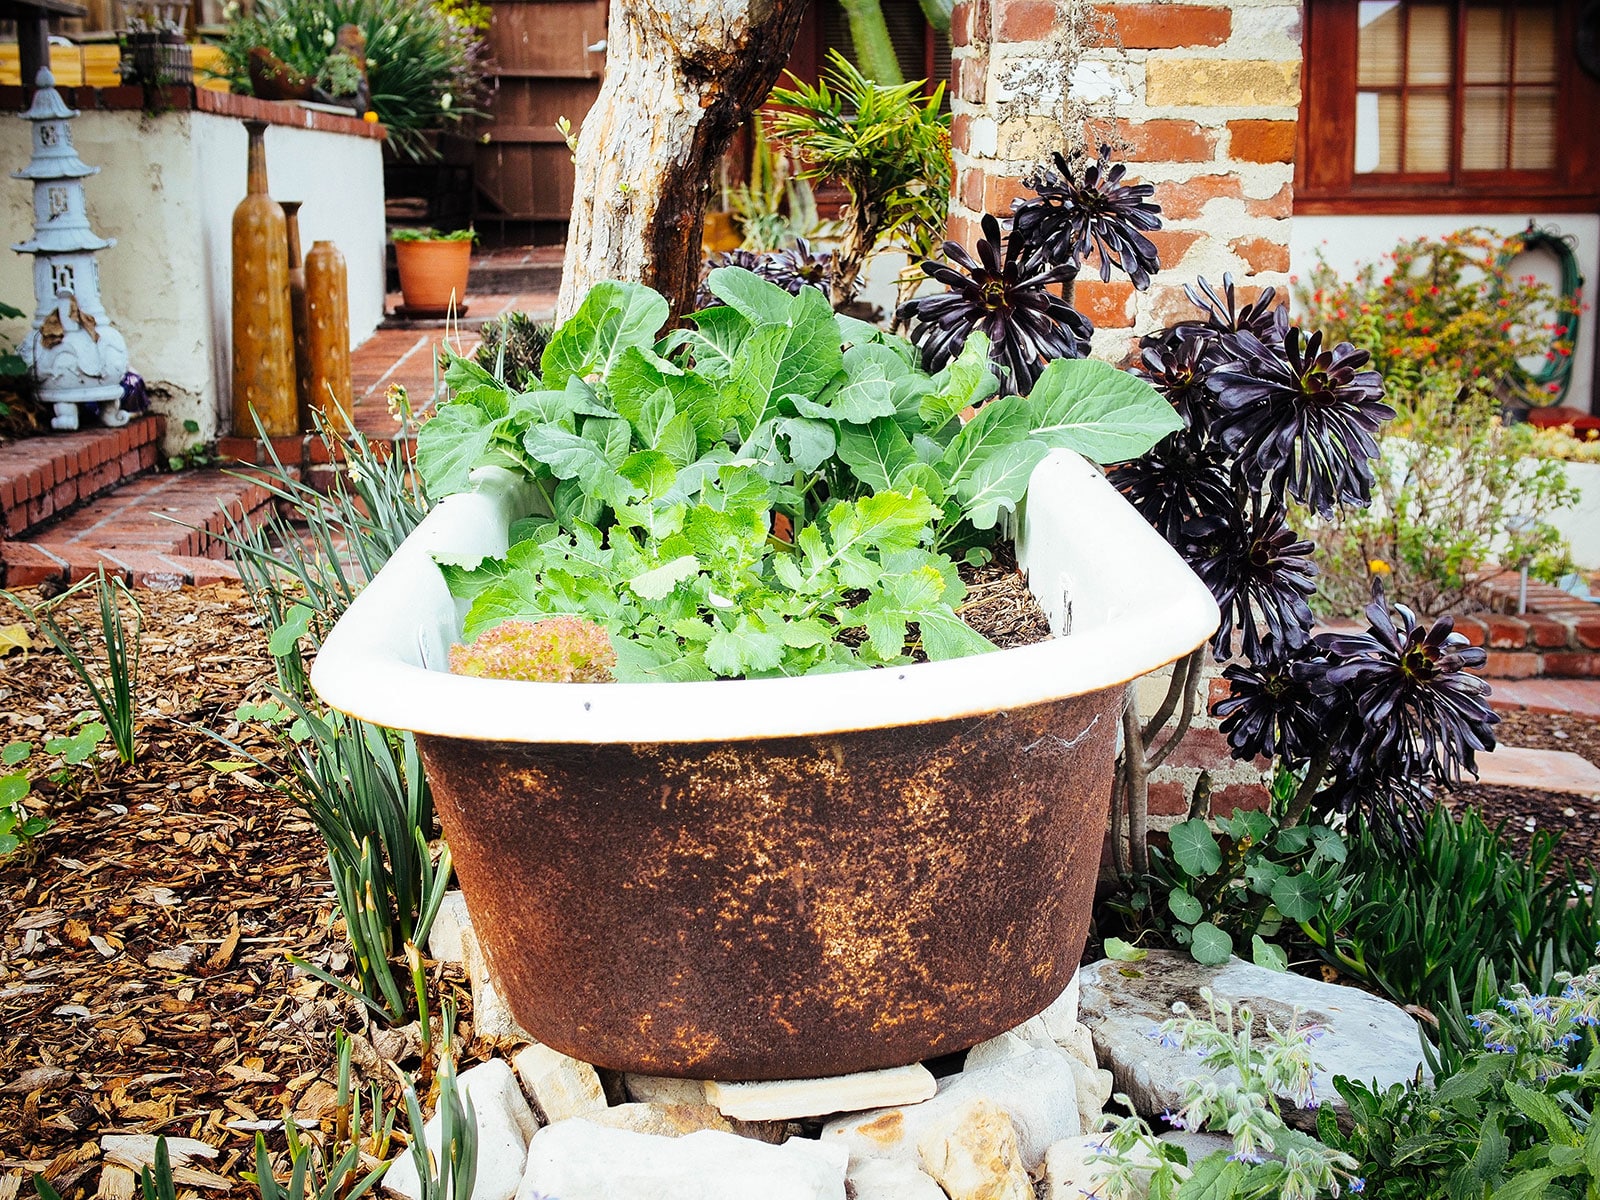 Leafy green vegetables growing in a rusty vintage clawfoot tub turned garden planter